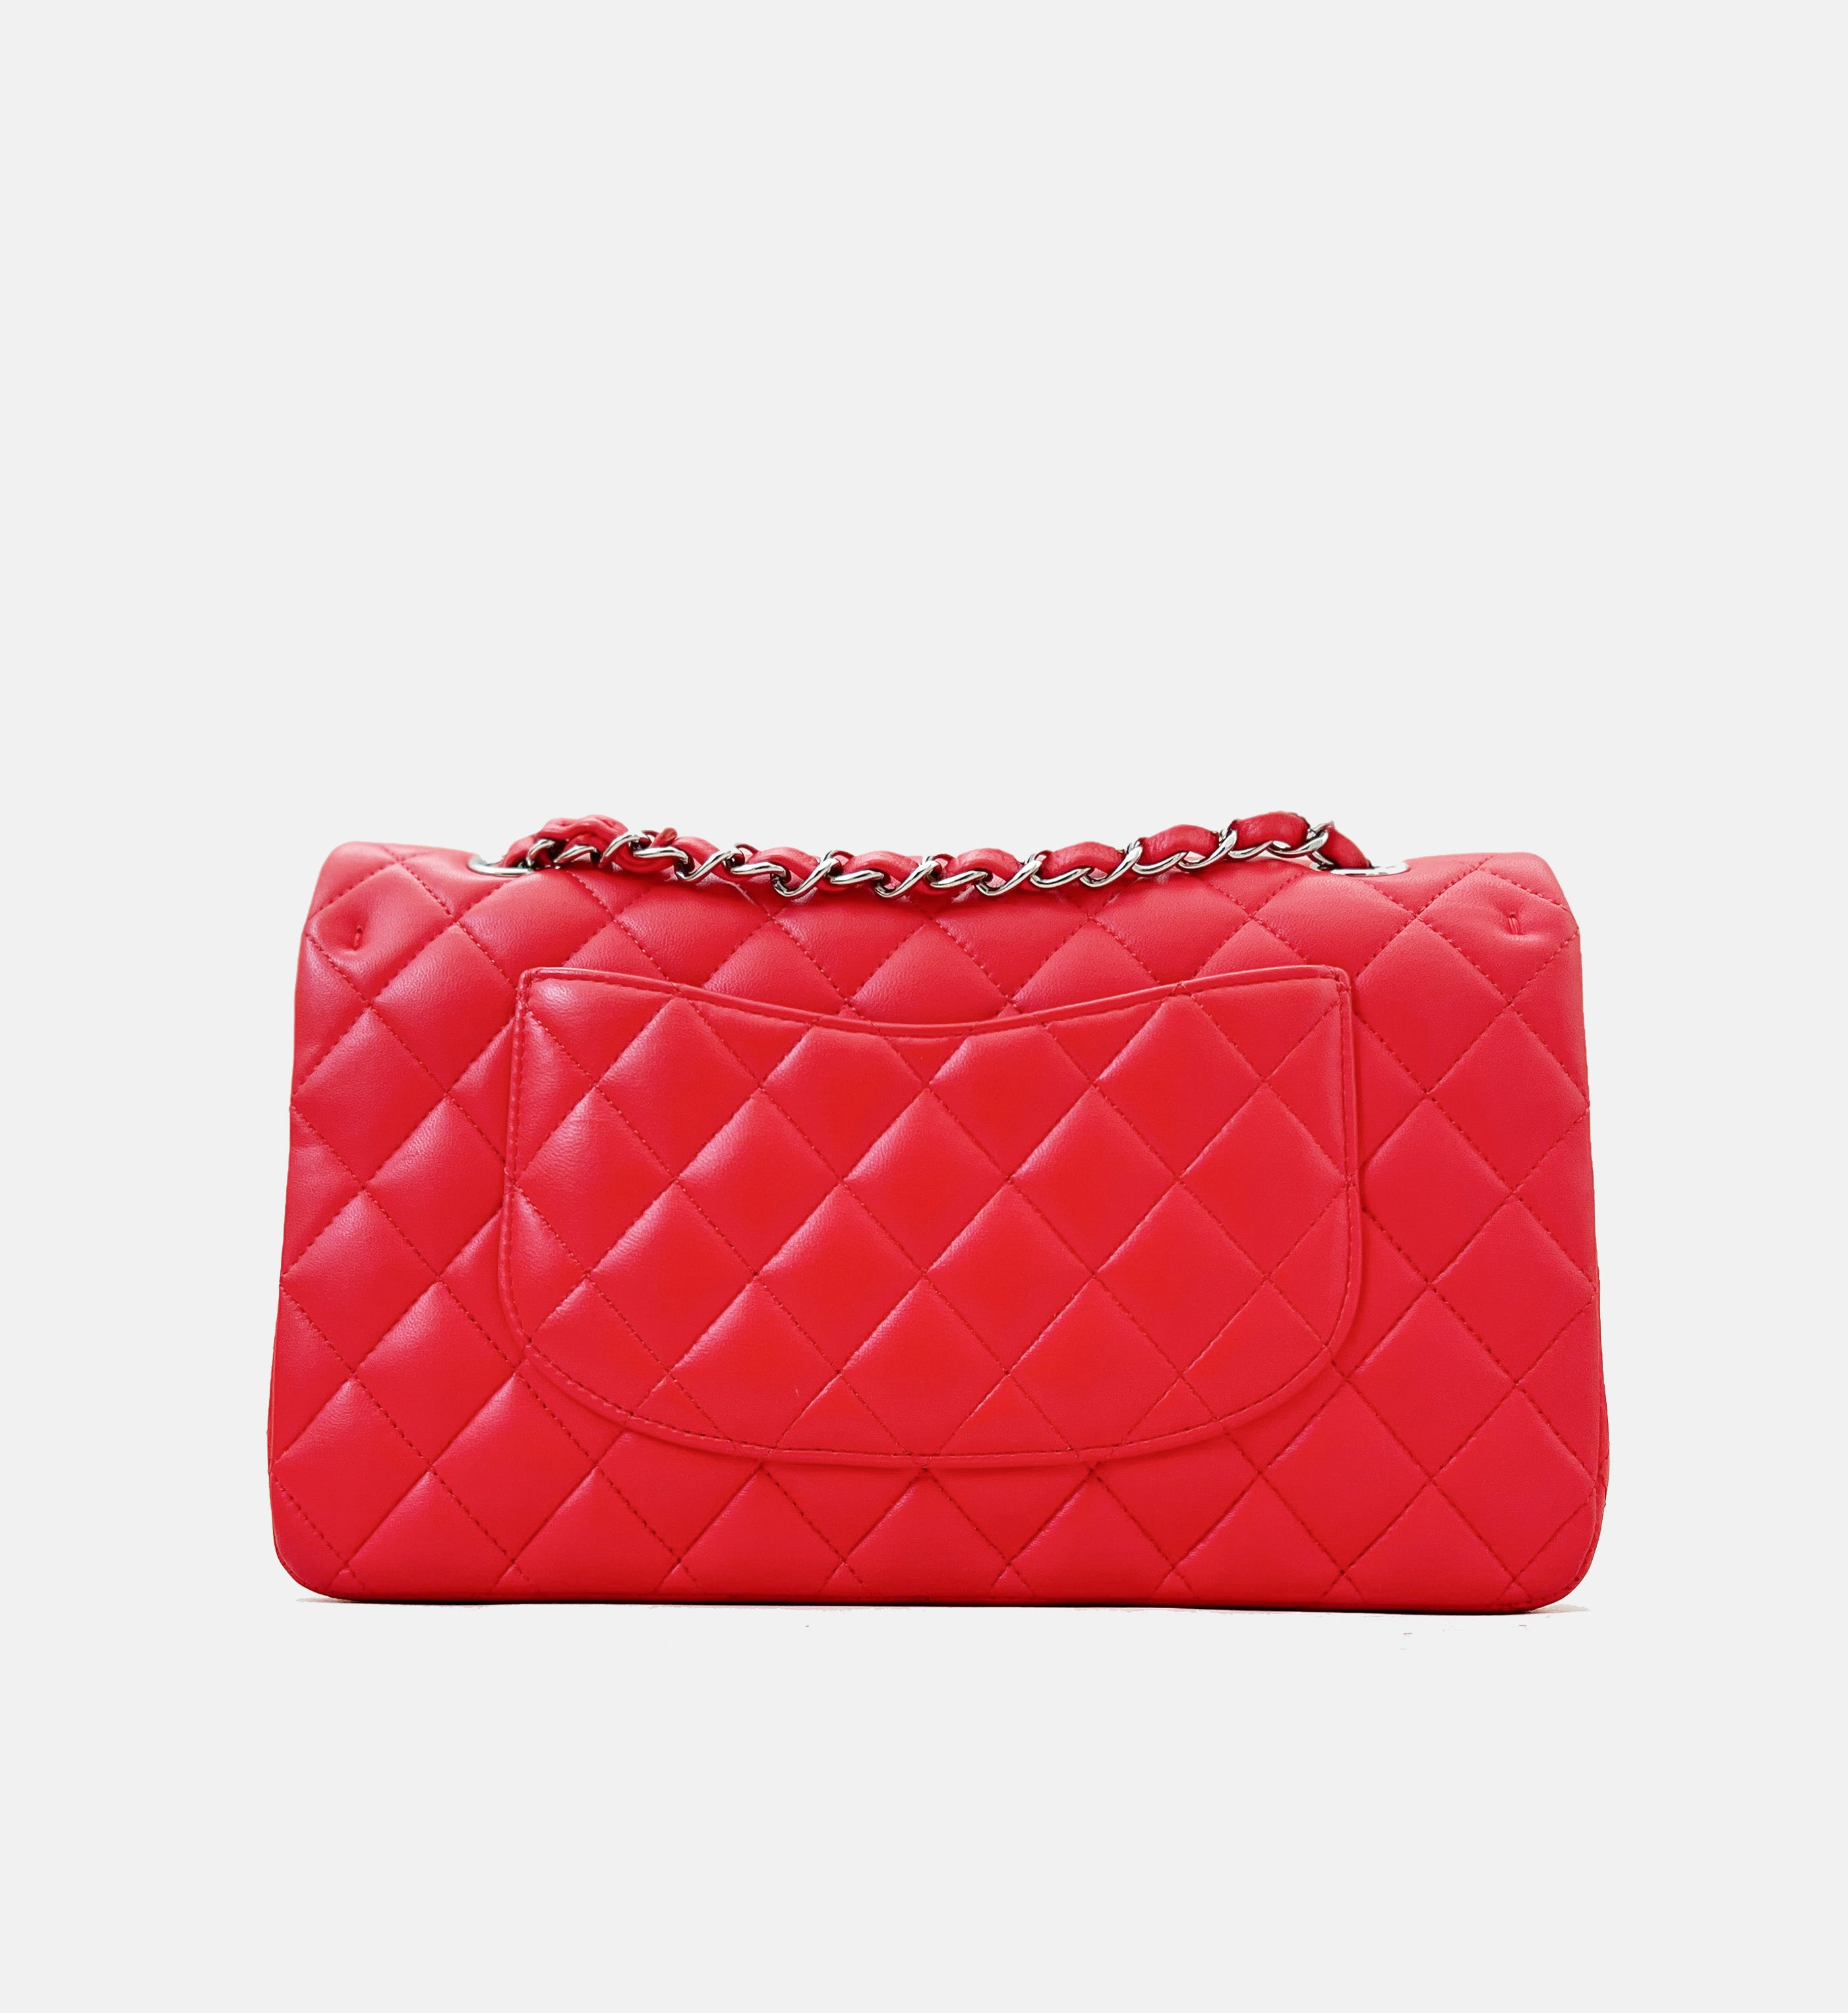 Classic Medium Double Flap In Red Lambskin with Silver Hardware